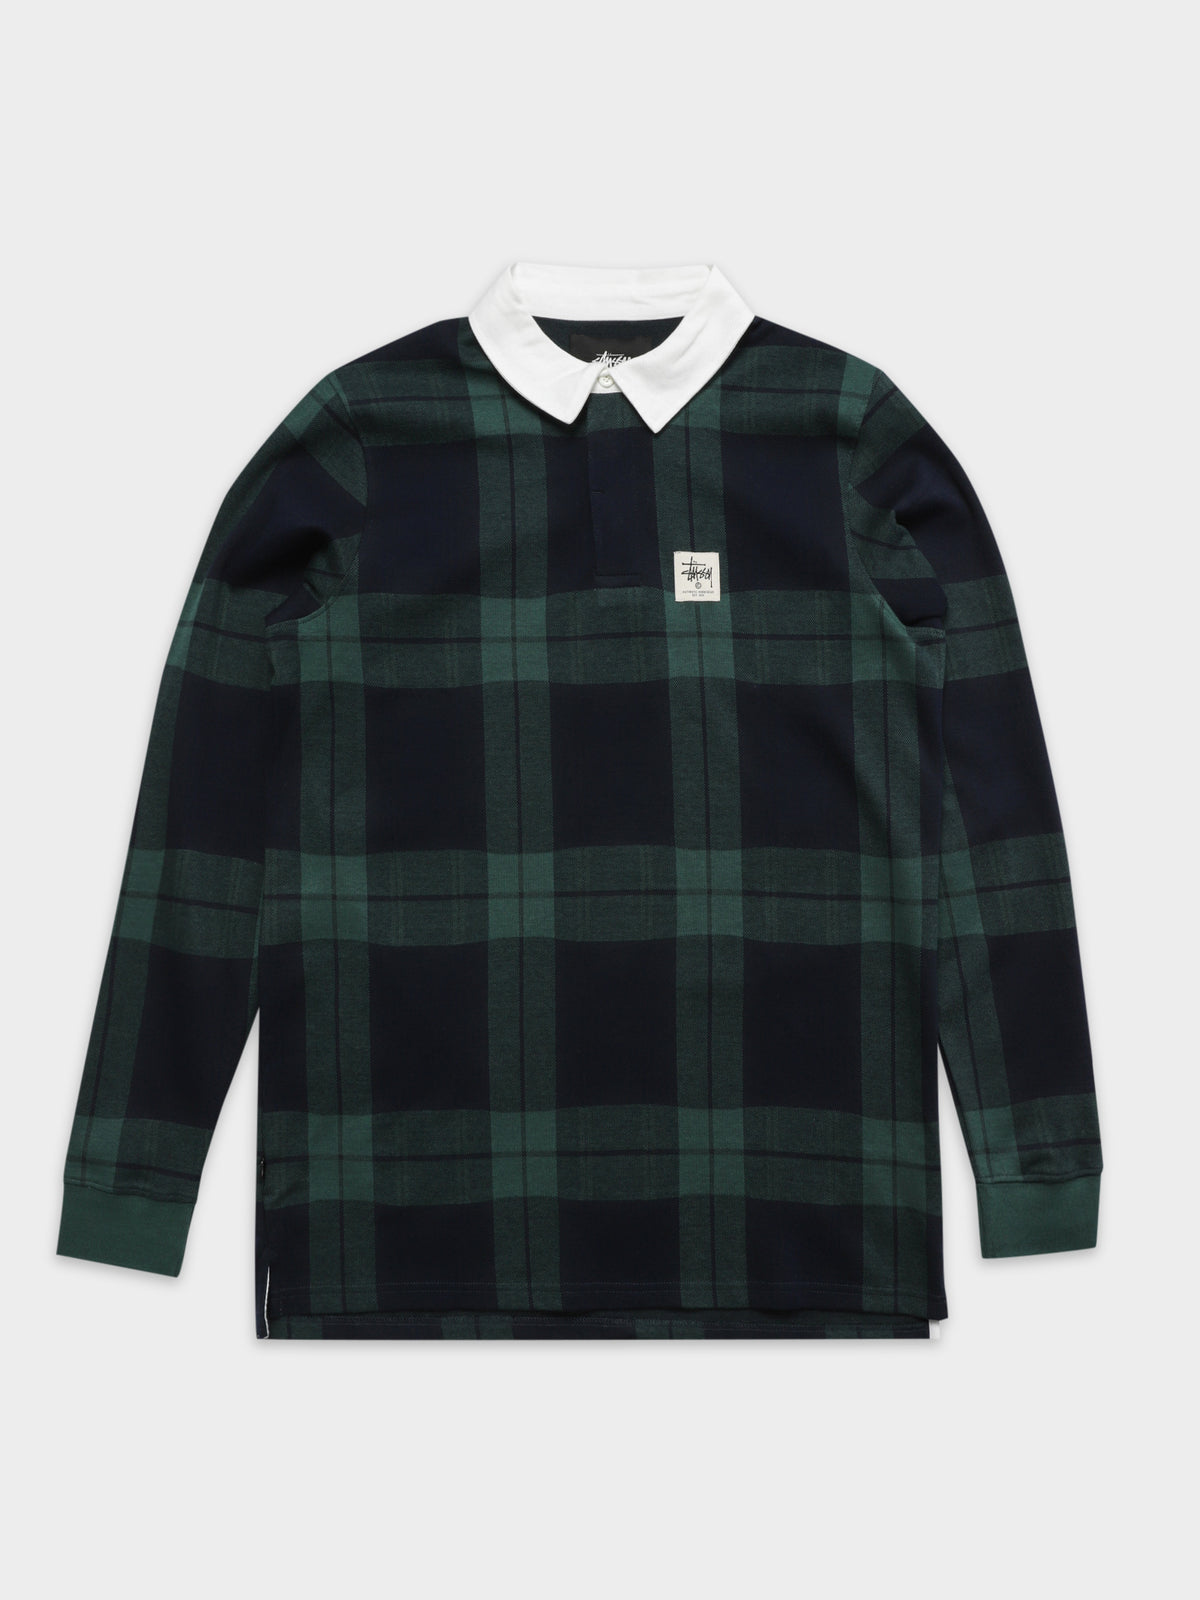 June Jacquard Rugby Shirt in Green